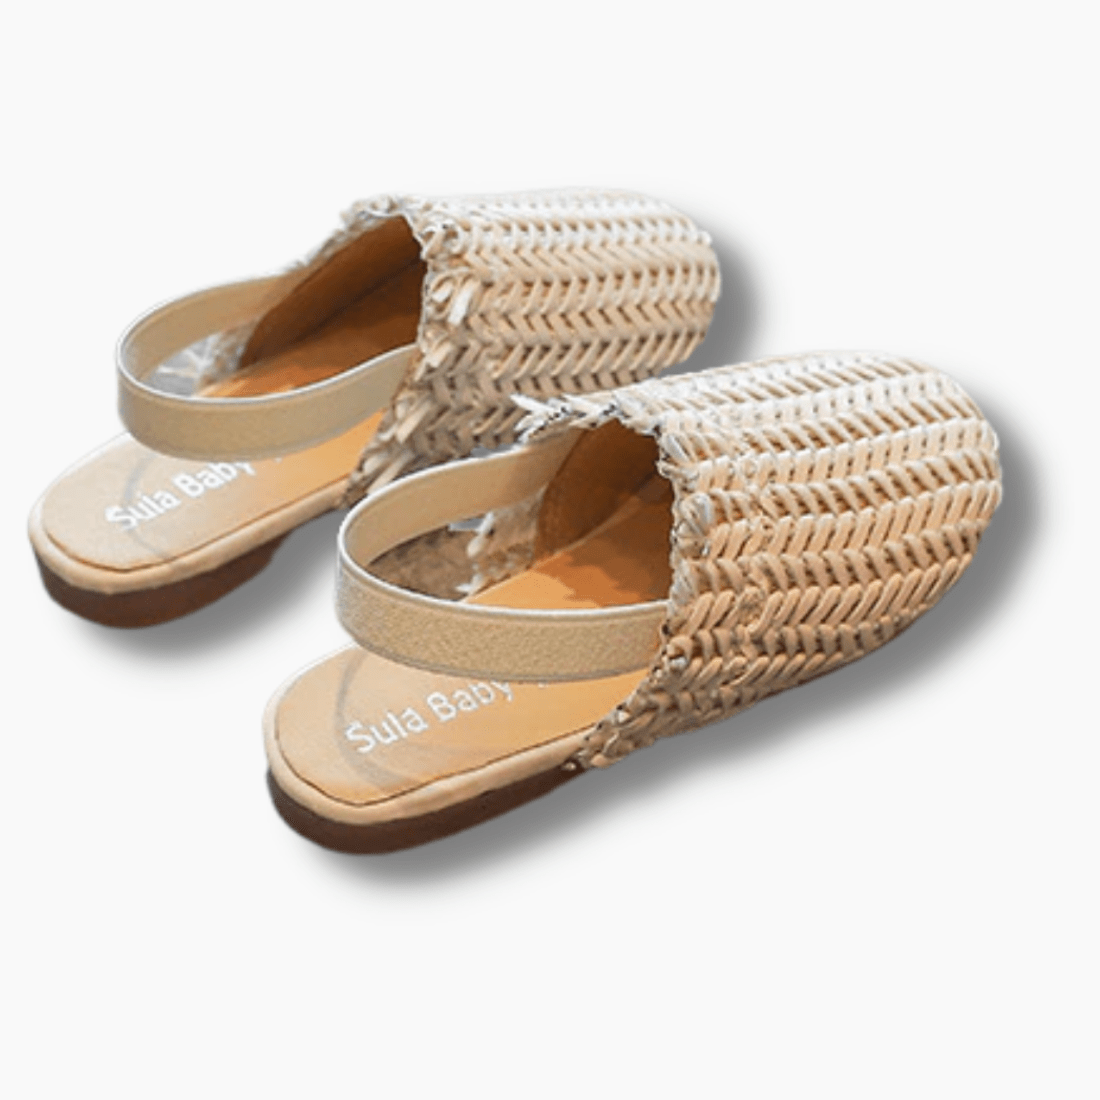 Shoes Girl Braided Sandals